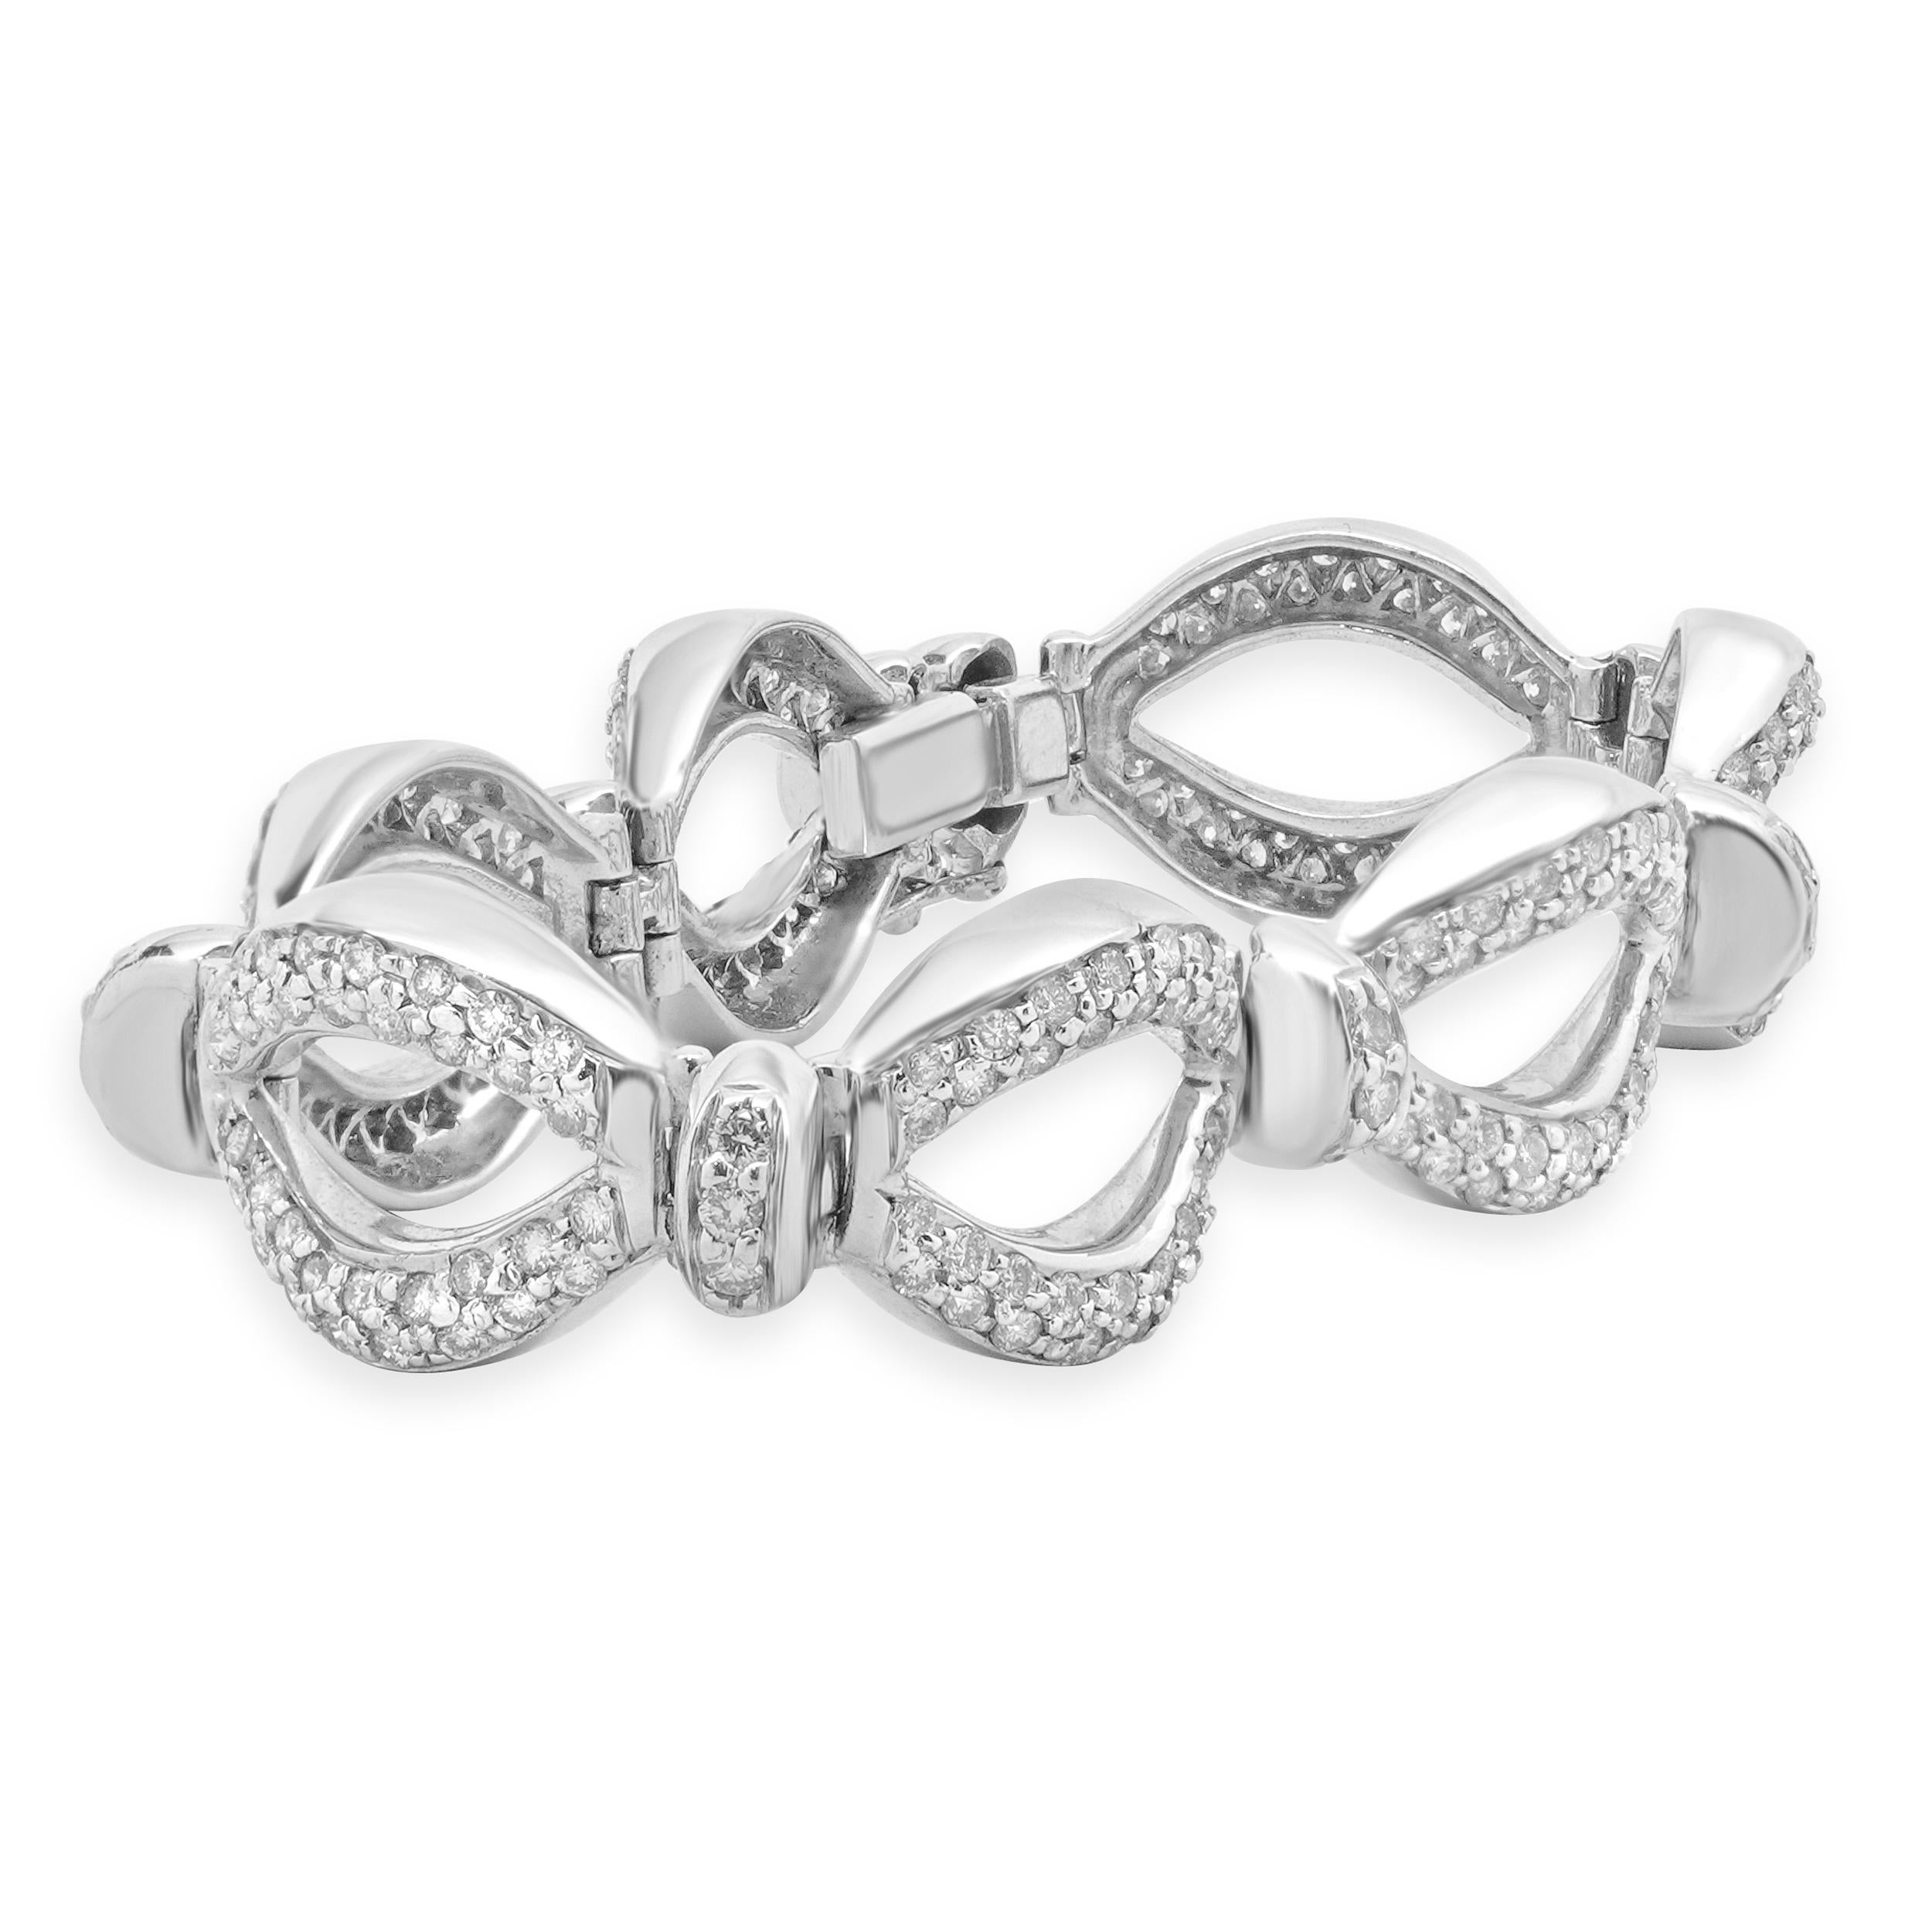 Designer: custom design
Material: 18K white Gold
Diamond: 262 round brilliant cut= 5.24cttw
Color: G
Clarity: SI1
Dimensions: bracelet will fit up to a 7-inch wrist
Weight: 33.26 grams
